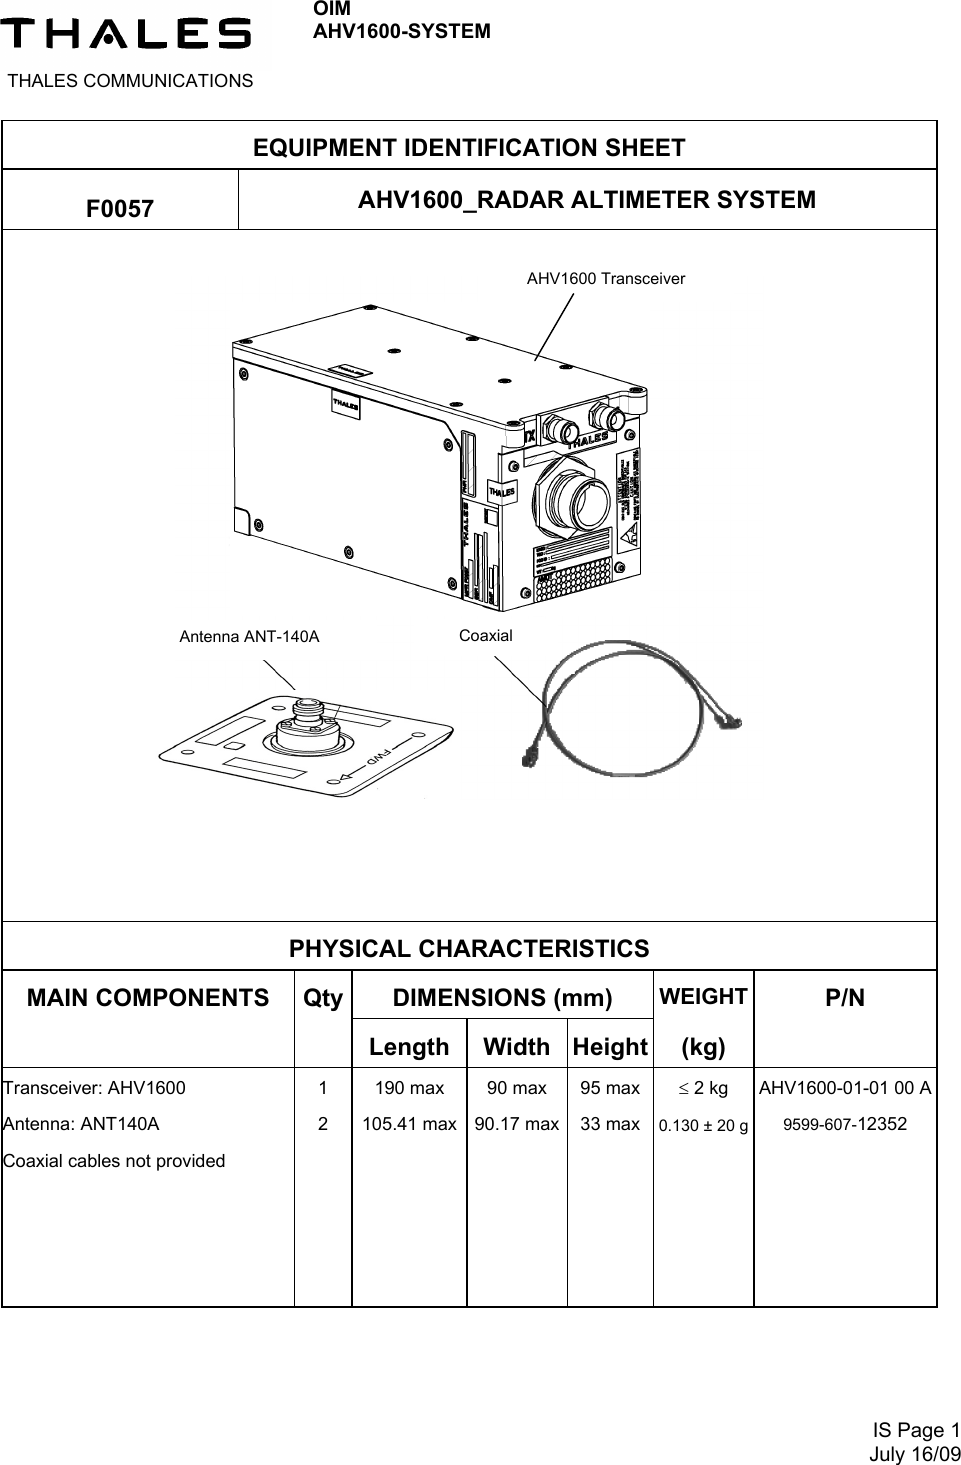  THALES COMMUNICATIONS OIM AHV1600-SYSTEM      IS Page 1July 16/09 EQUIPMENT IDENTIFICATION SHEET  F0057  AHV1600_RADAR ALTIMETER SYSTEM       PHYSICAL CHARACTERISTICS MAIN COMPONENTS  Qty DIMENSIONS (mm)  WEIGHT  P/N   Length Width Height (kg)  Transceiver: AHV1600 Antenna: ANT140A Coaxial cables not provided 1 2   190 max 105.41 max 90 max 90.17 max  95 max 33 max    2 kg 0.130 ± 20 g   AHV1600-01-01 00 A9599-607-12352  Antenna ANT-140A  Coaxial AHV1600 Transceiver 